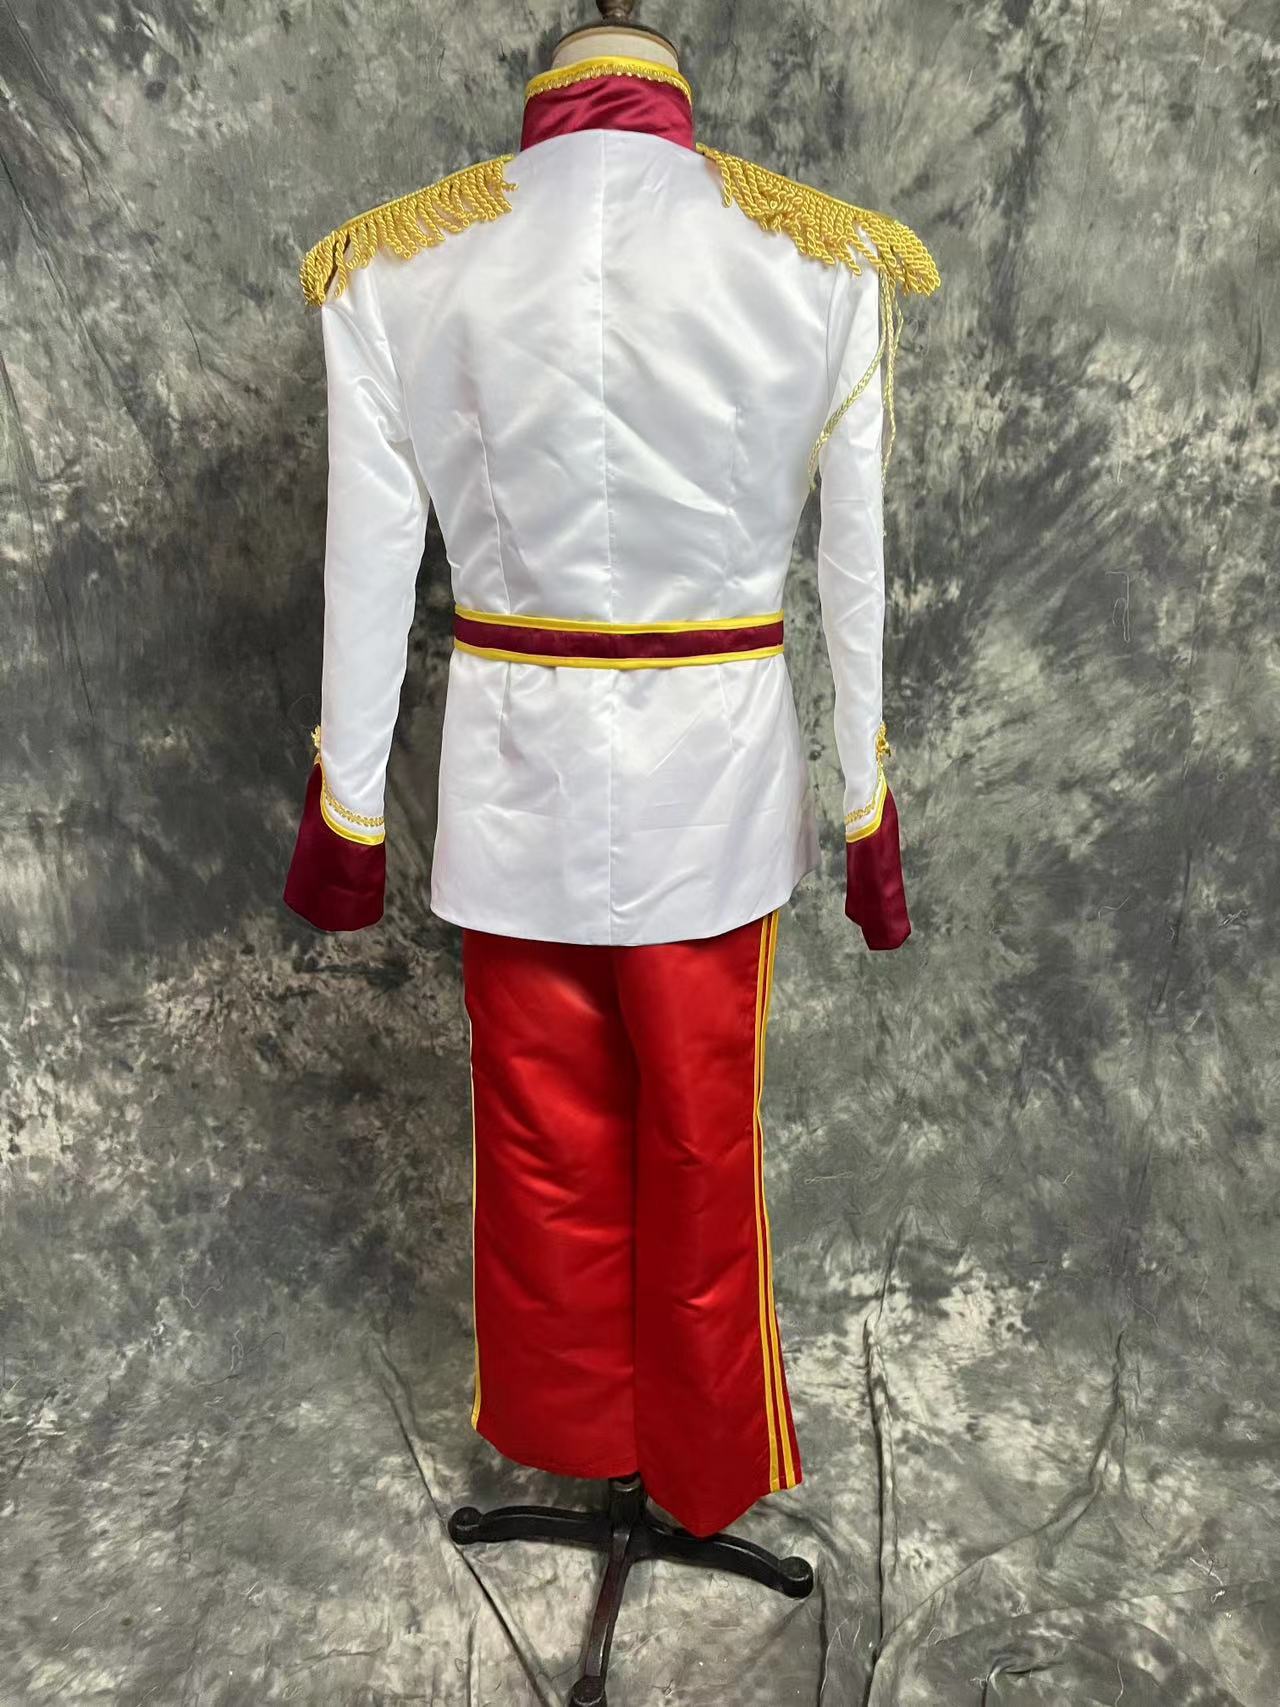 Cinderella Prince Charming Cosplay Costume Free Shipping